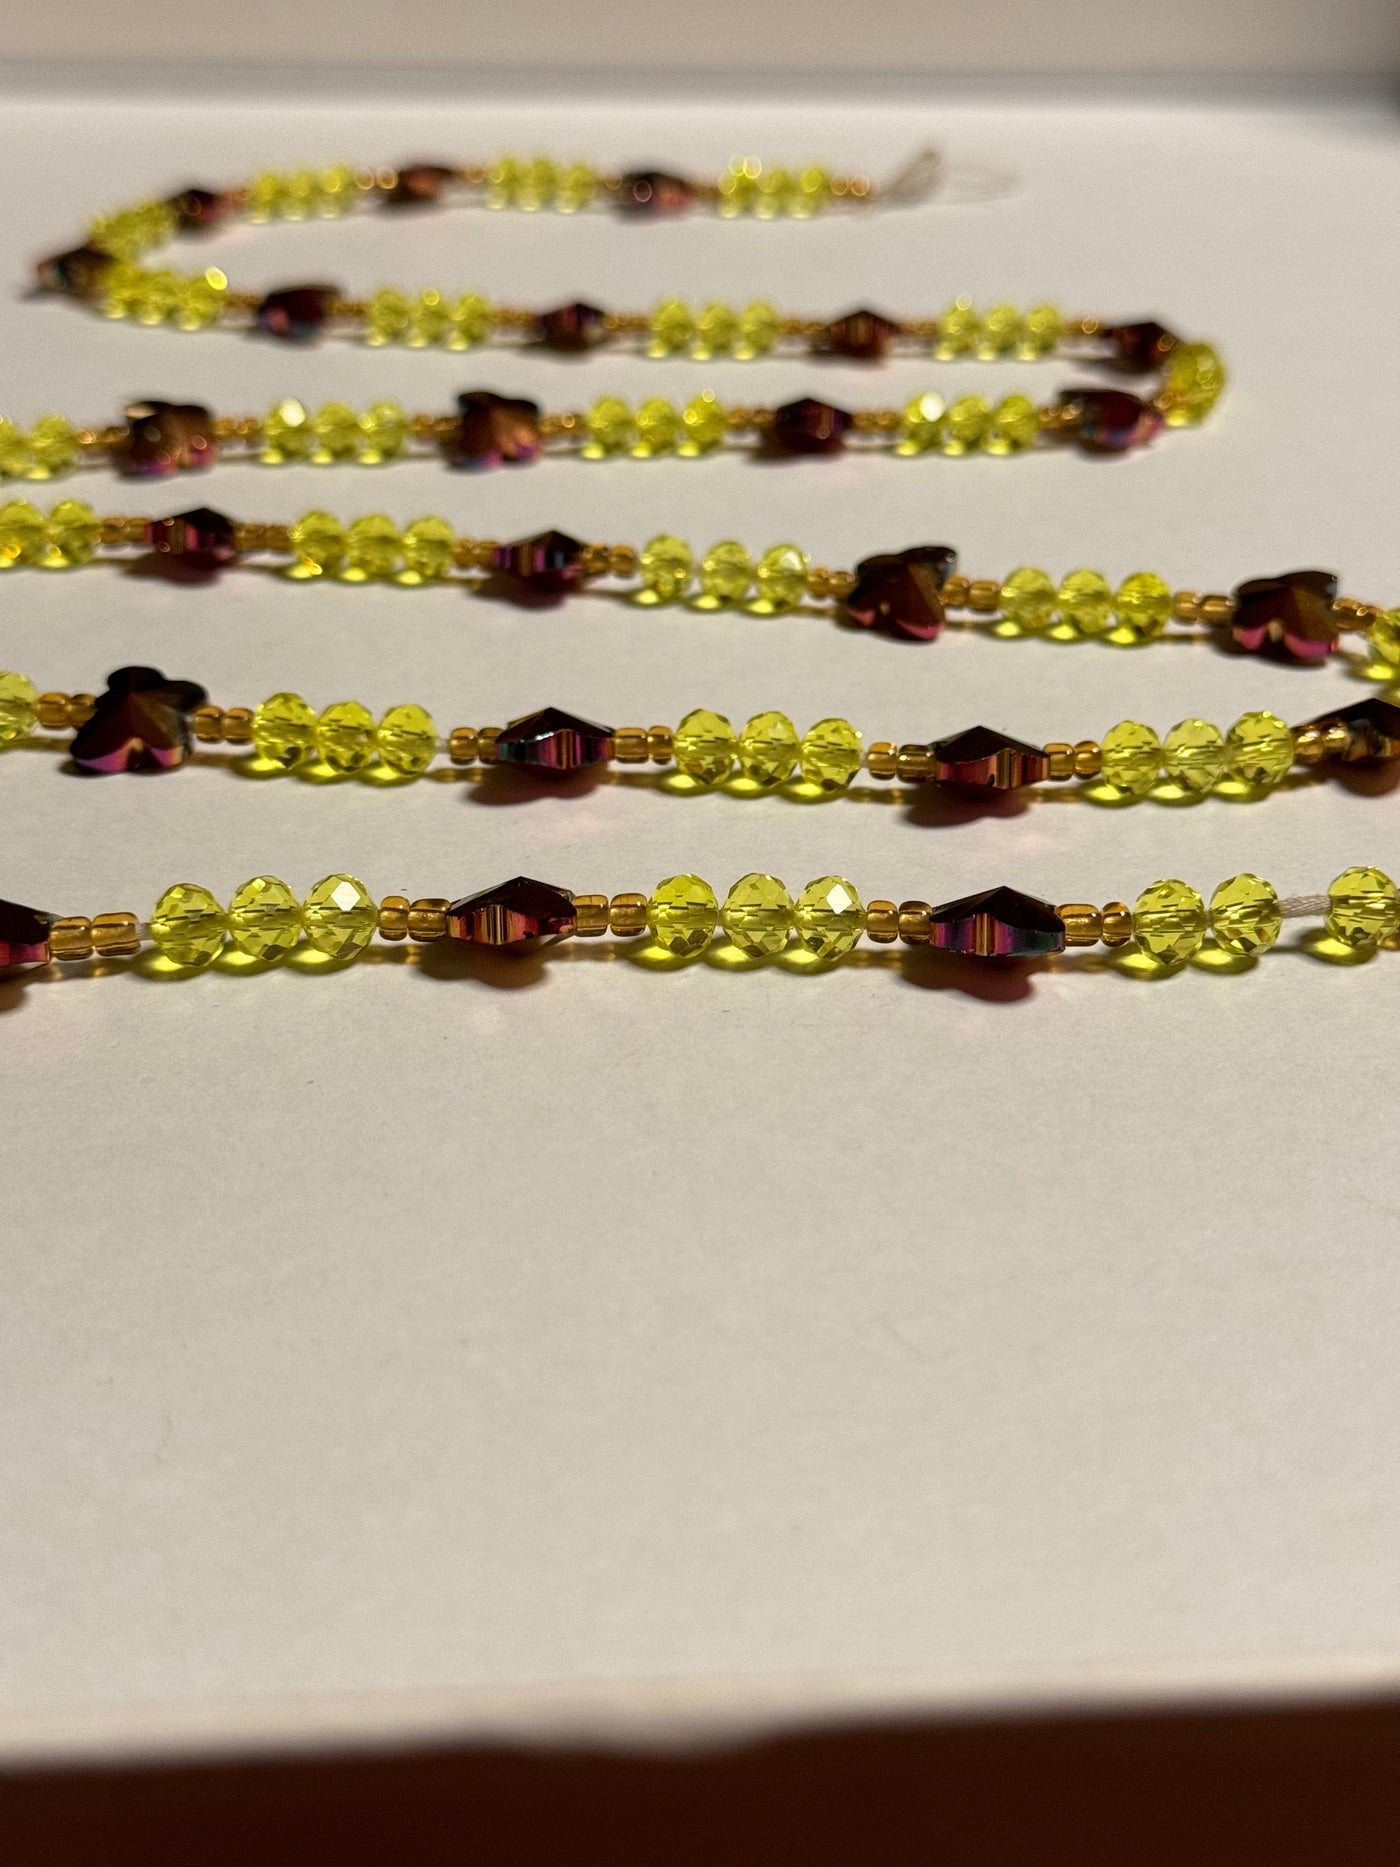 Femi (Love Me) Authentic Ghana Yellow Waistbeads 46 Inches (Wholesale)